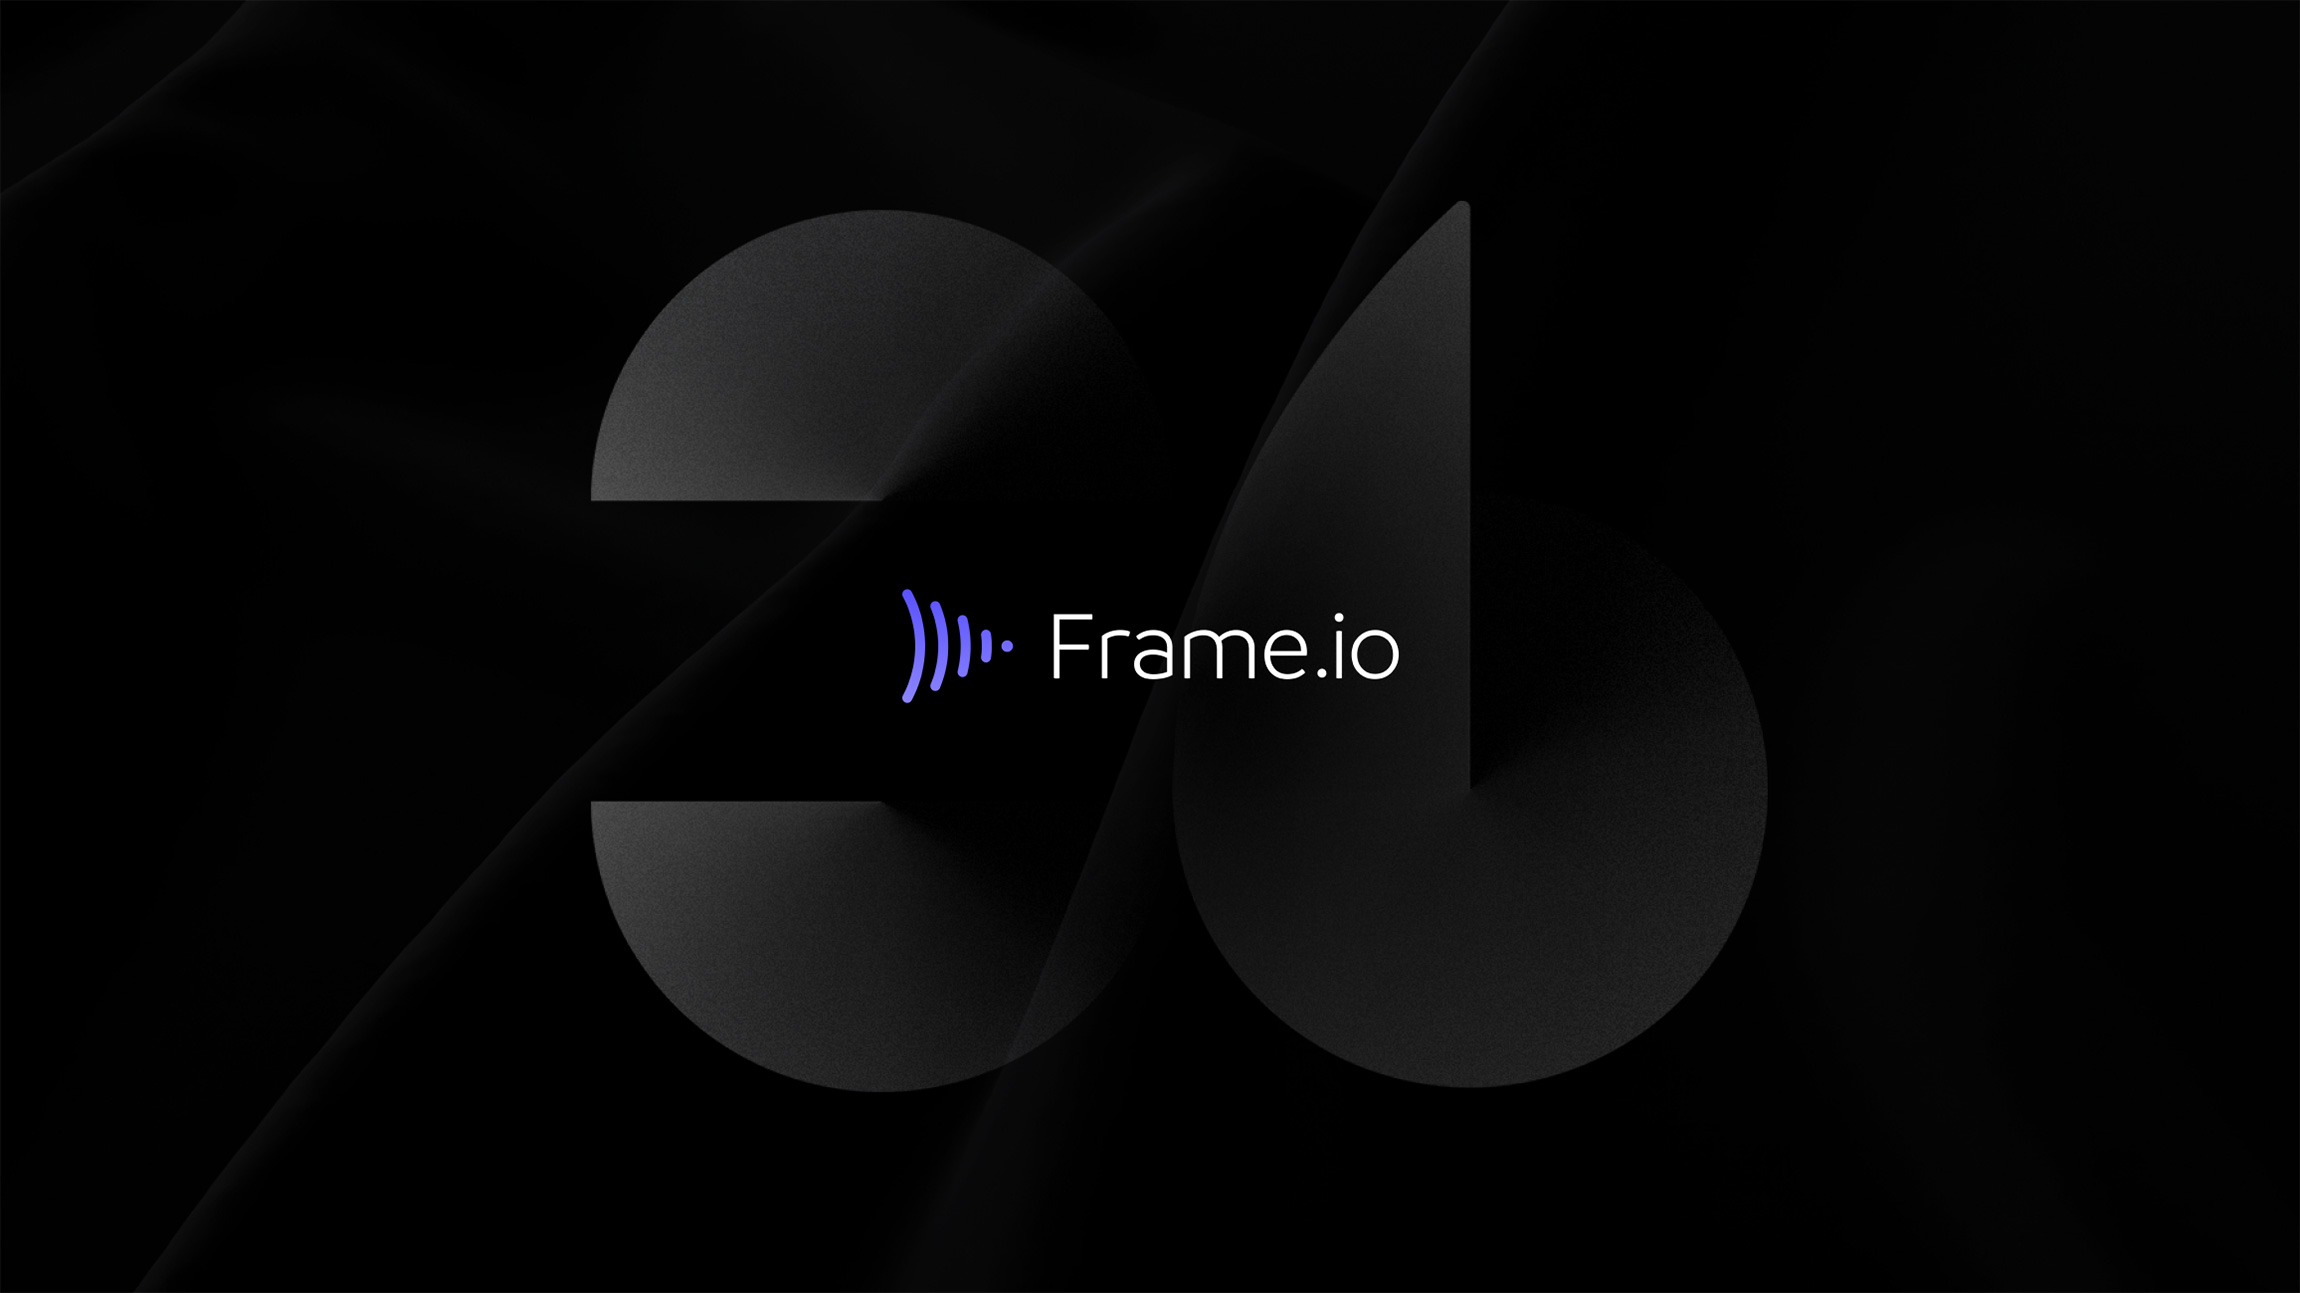 Introducing Frame.io v3.6: Rapidly Responsive. Powerfully Secure.